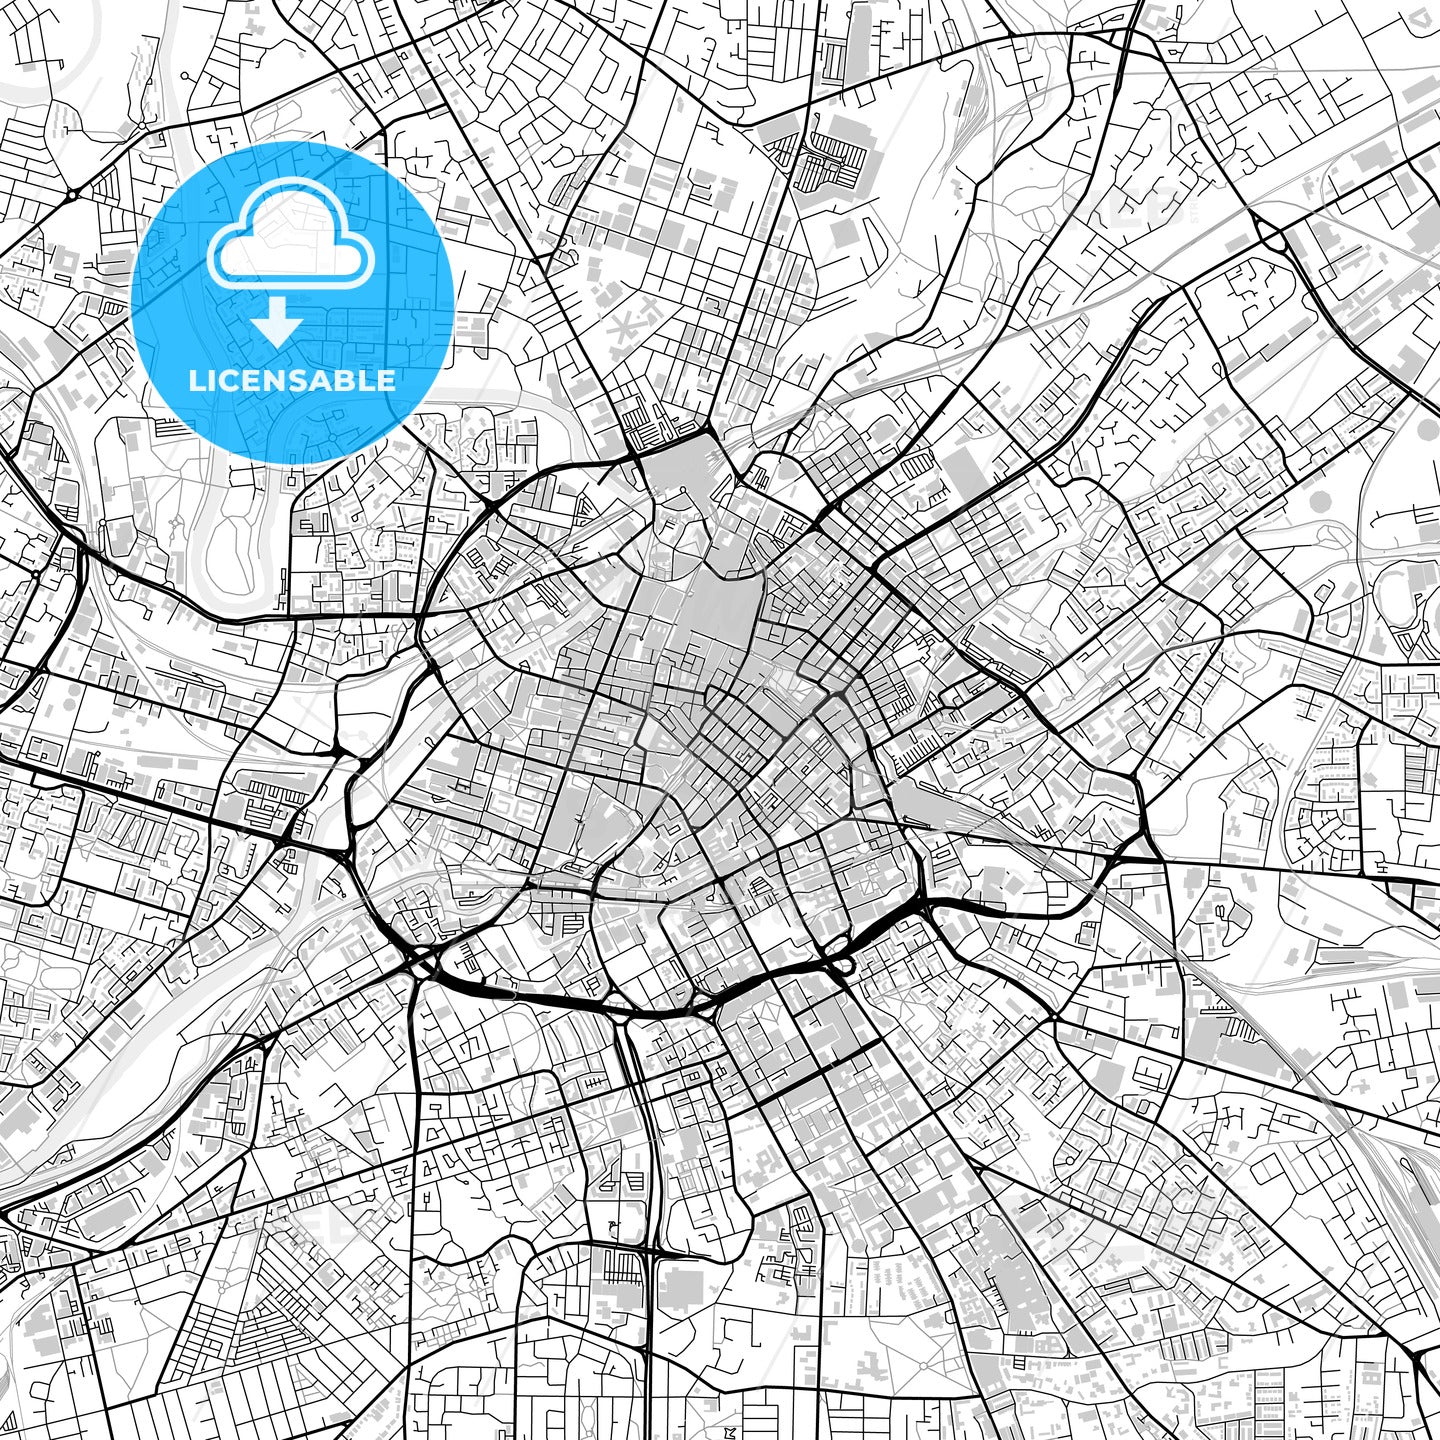 Downtown map of Manchester, light